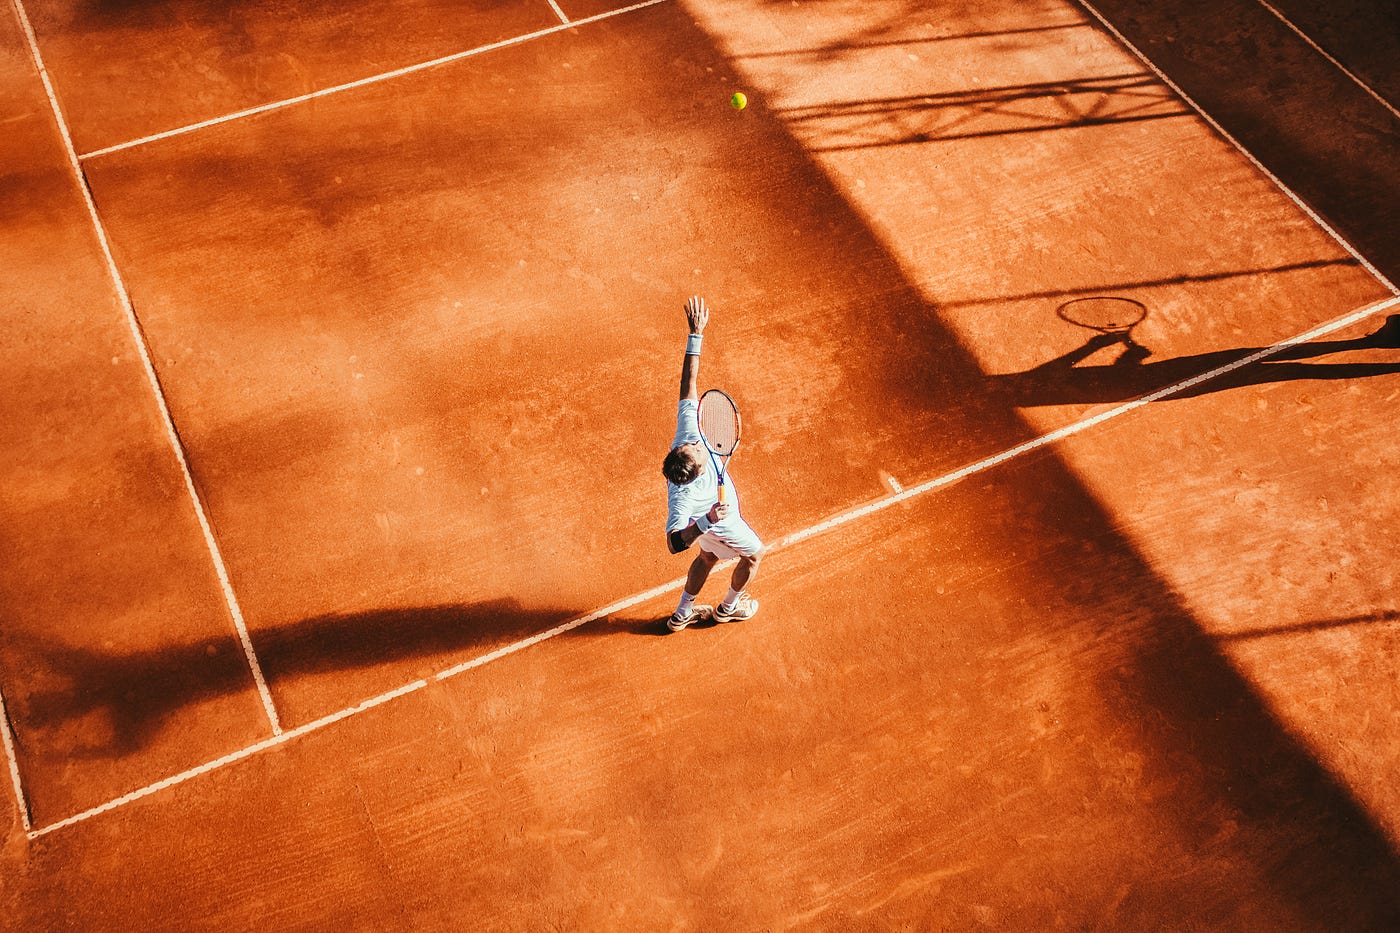 Modelling a Game of Tennis | by Mark Jamison | Towards Data Science